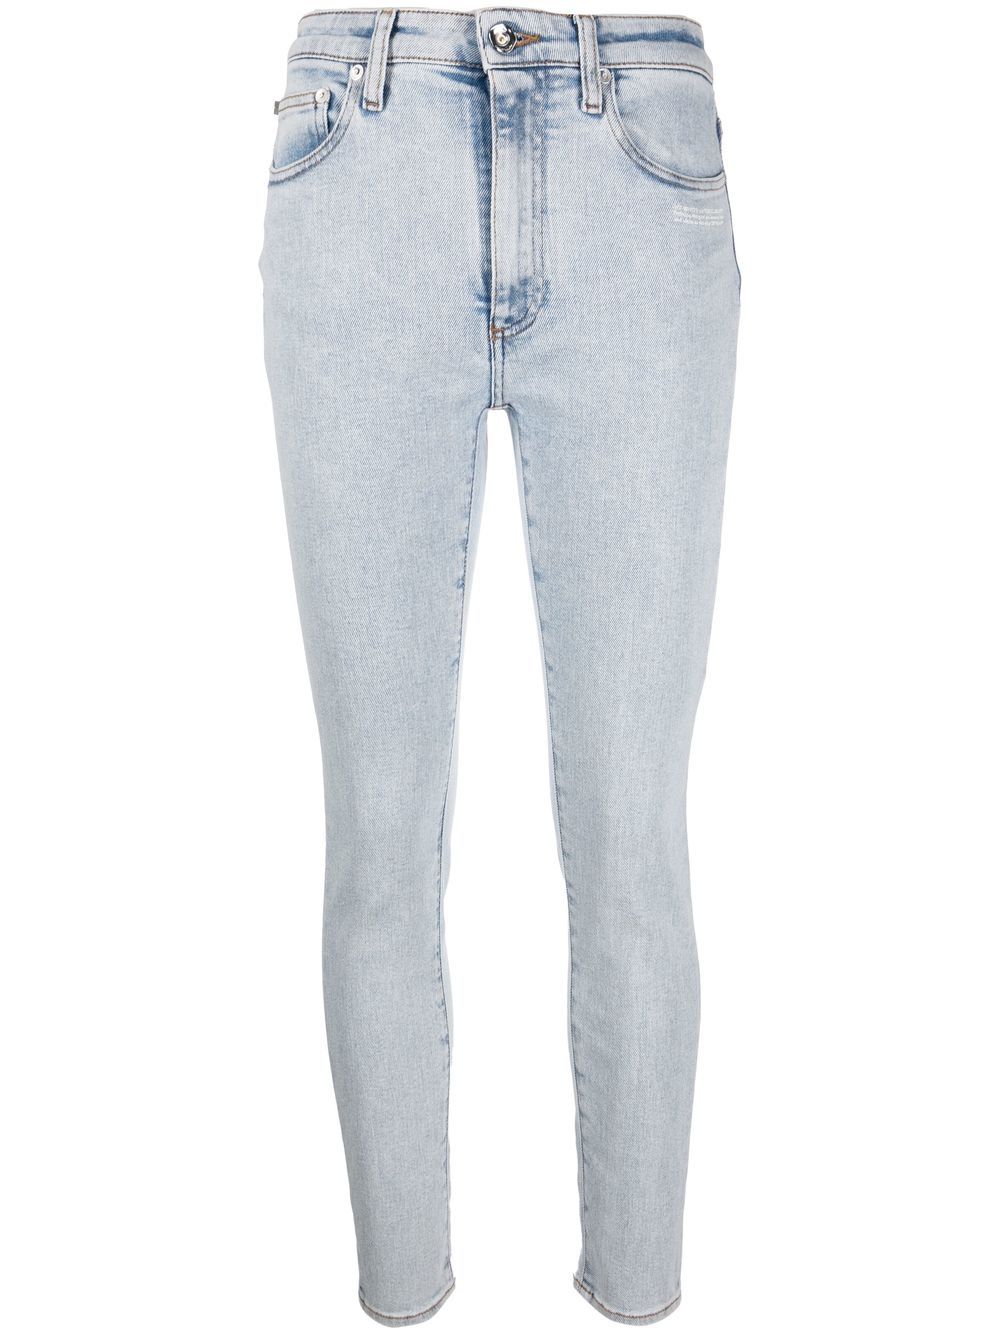 Off-White mid-rise Skinny Jeans - Farfetch